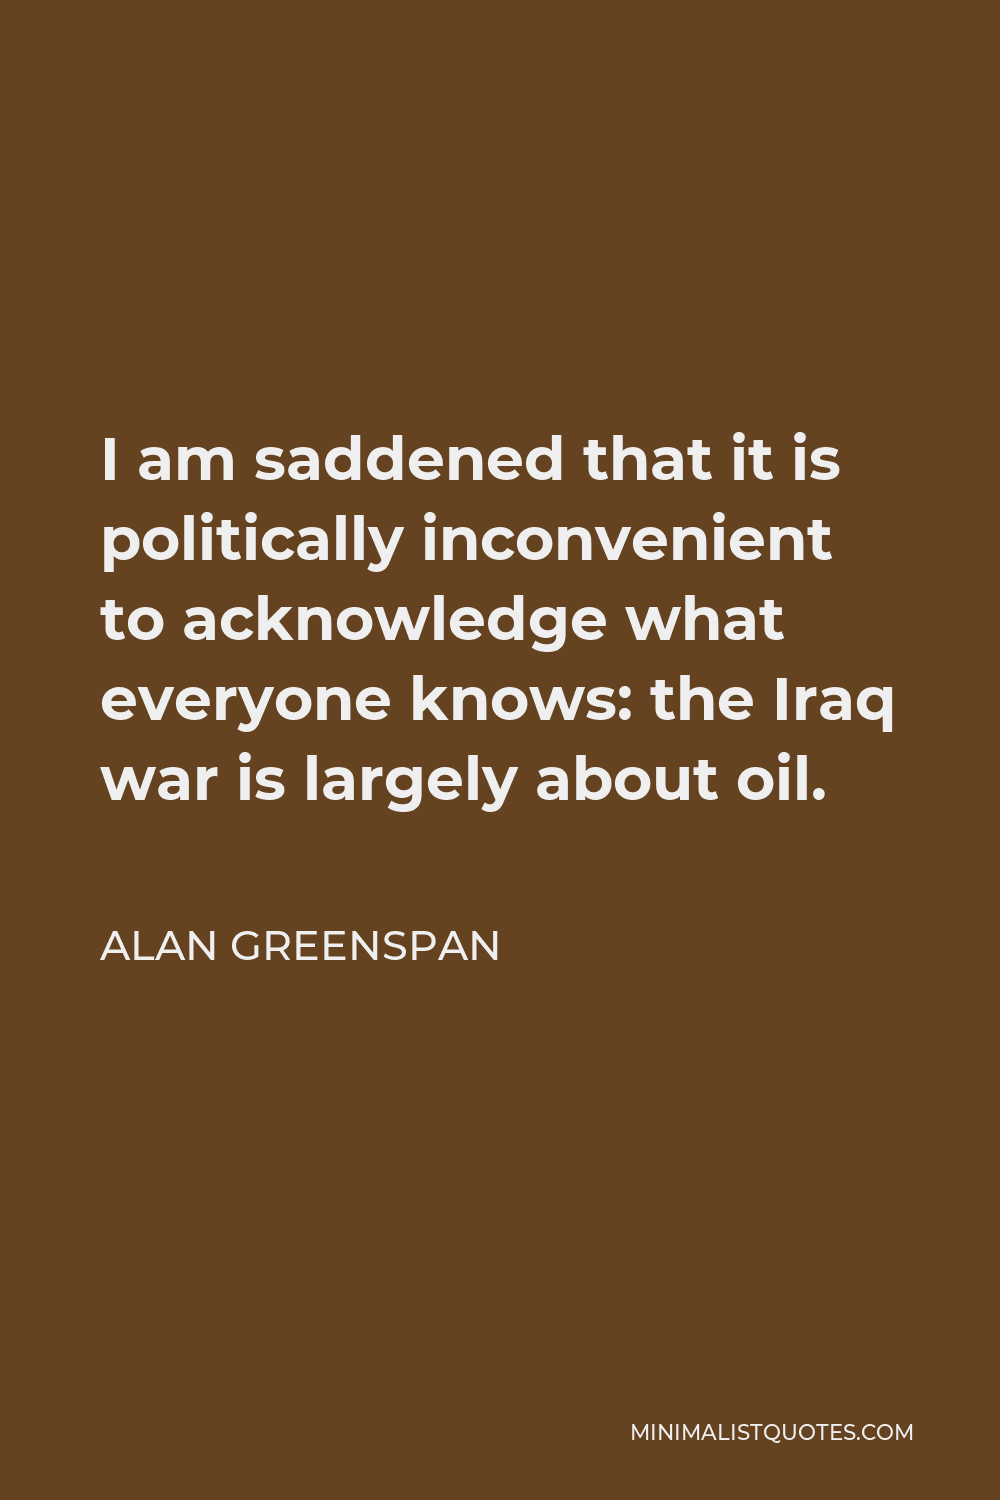 Alan Greenspan Quote - I am saddened that it is politically inconvenient to acknowledge what everyone knows: the Iraq war is largely about oil.